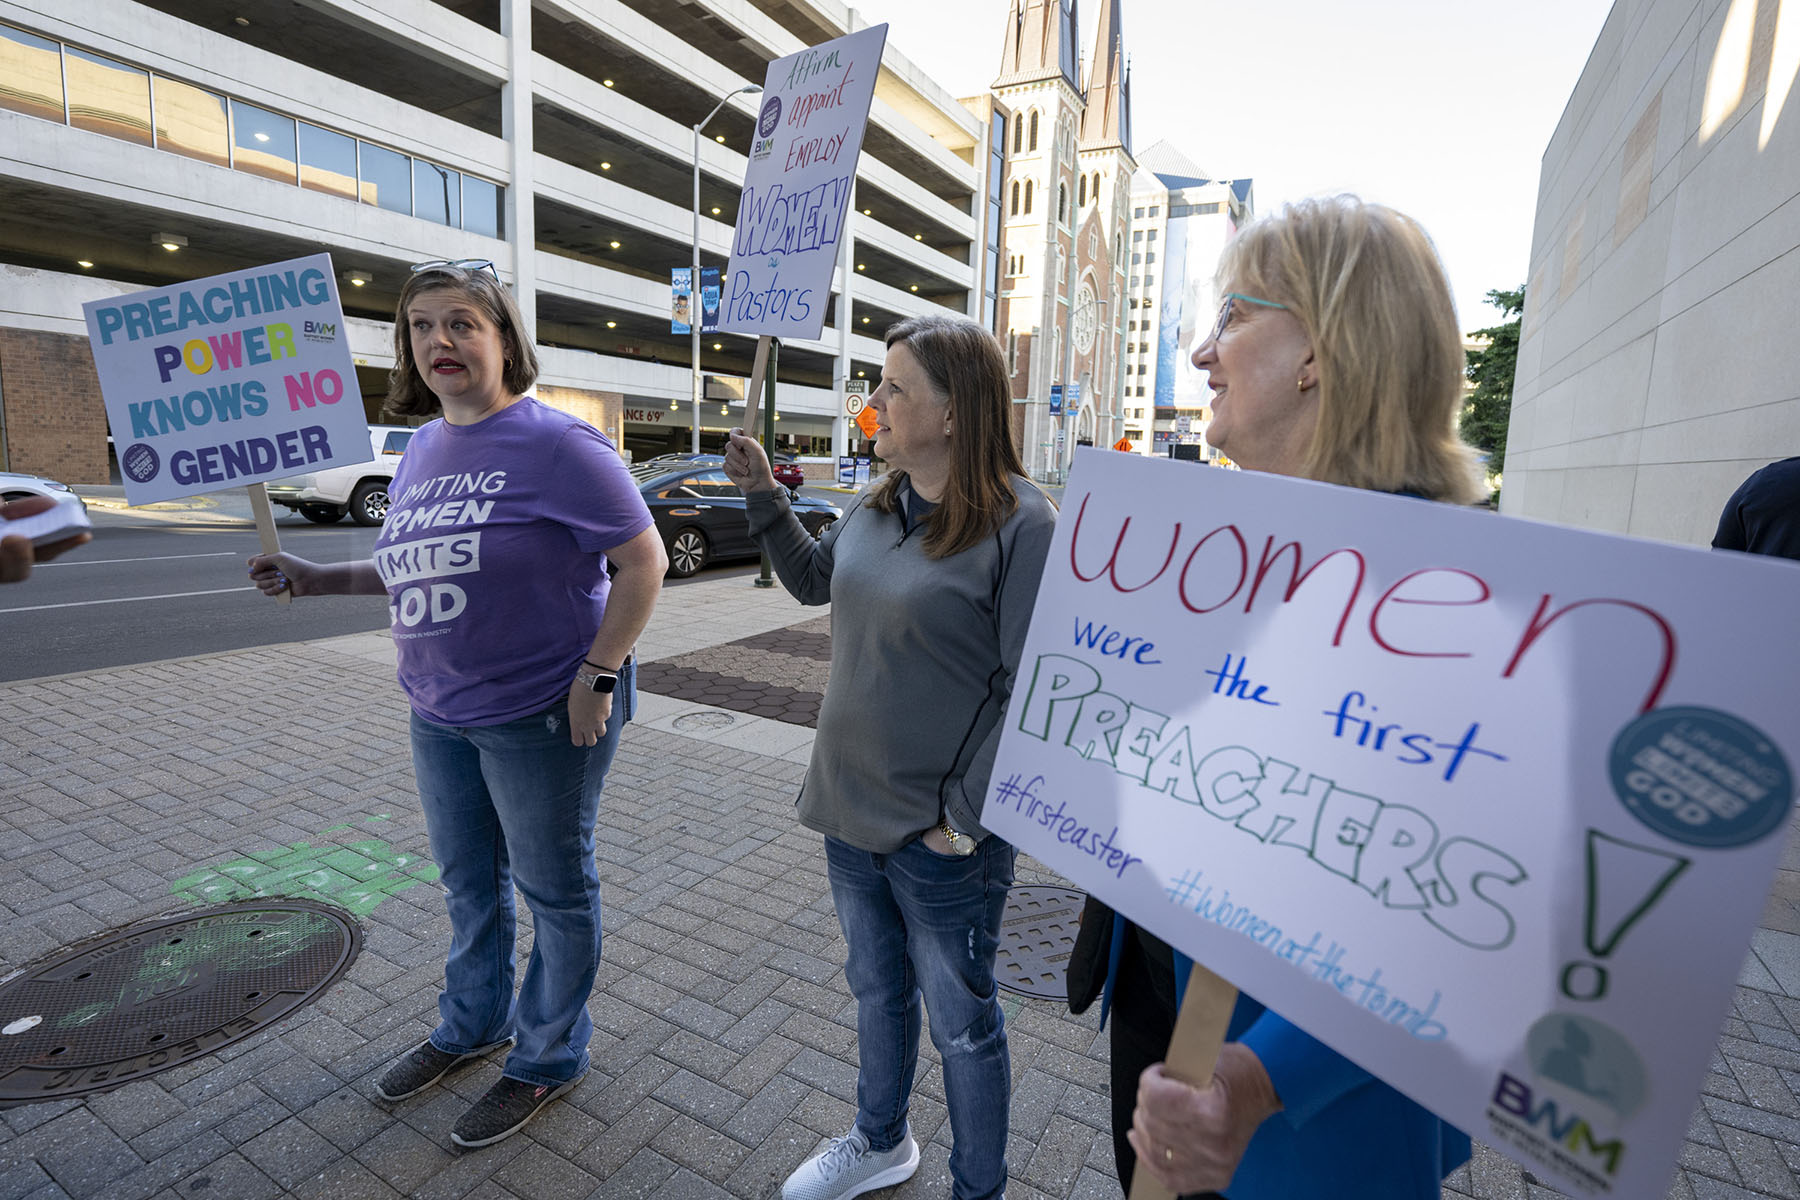 Three women holding signs that read "Preaching power knows no gender," "Affirm, appoint employ women pastors" and "Women were the first preachers" stand outside the Southern Baptist Convention's annual meeting.